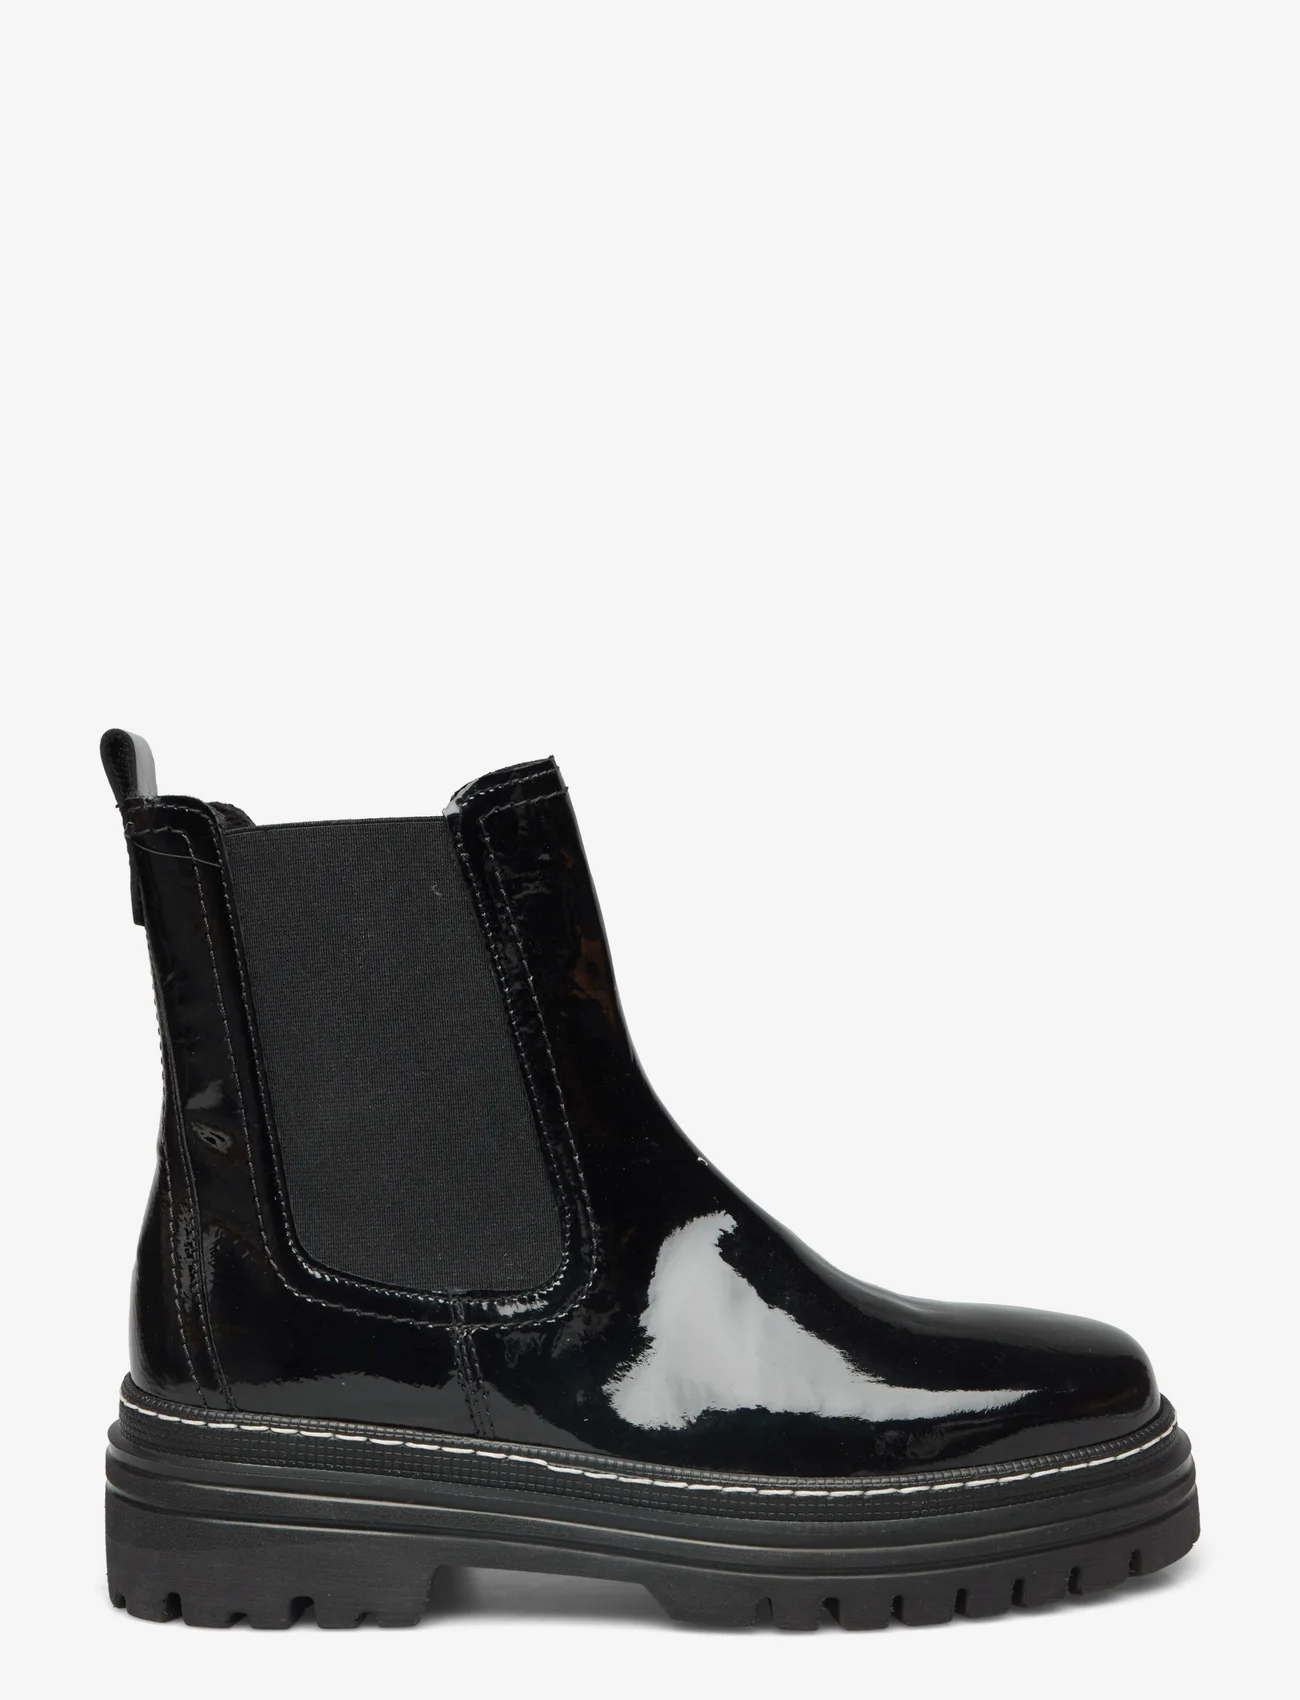 Gabor - Chelsea - flat ankle boots - black - 1